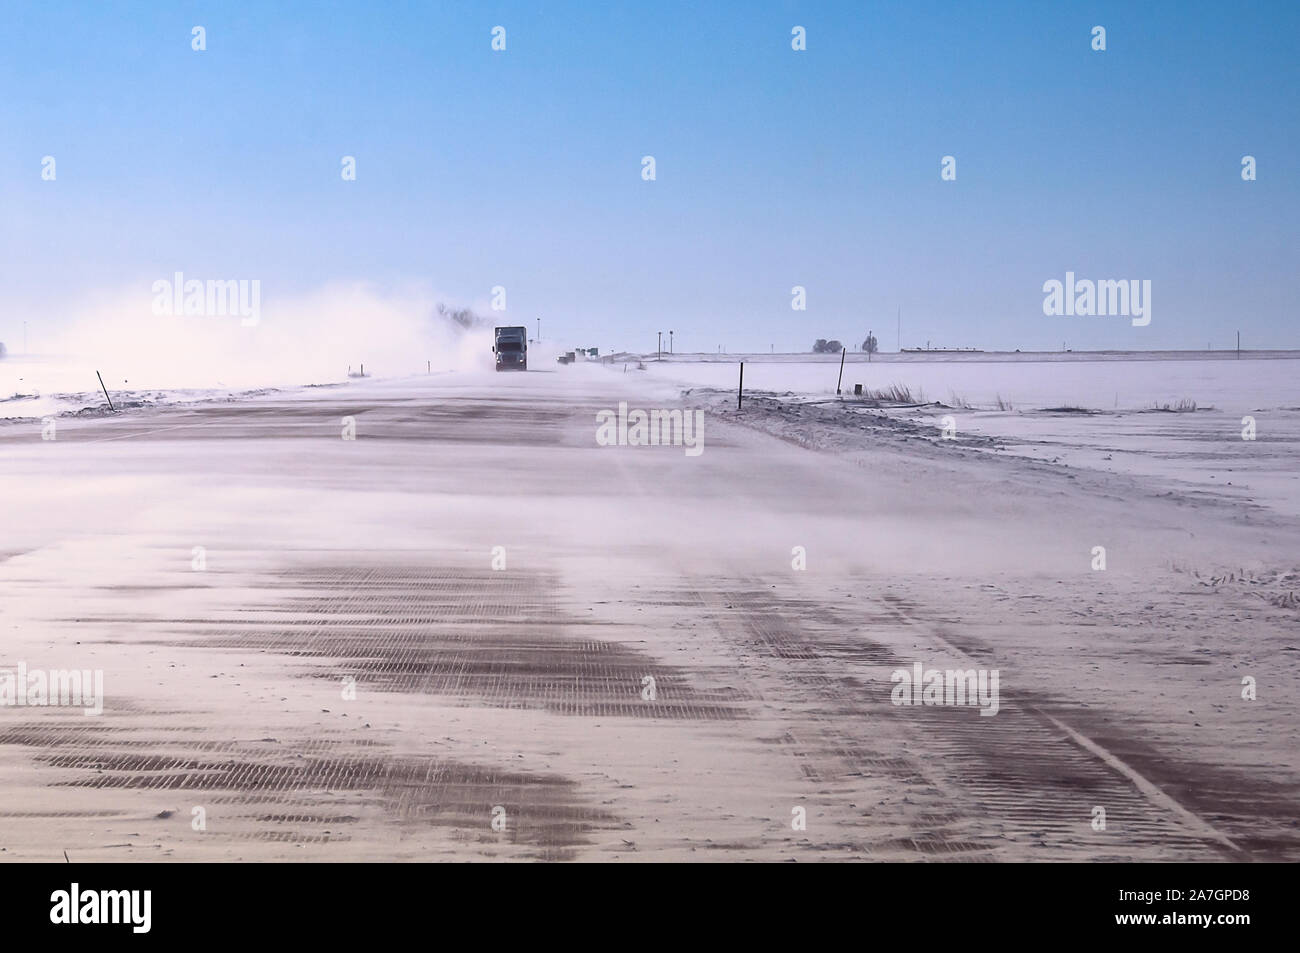 Winter wind and blowing snow on a major highway Stock Photo